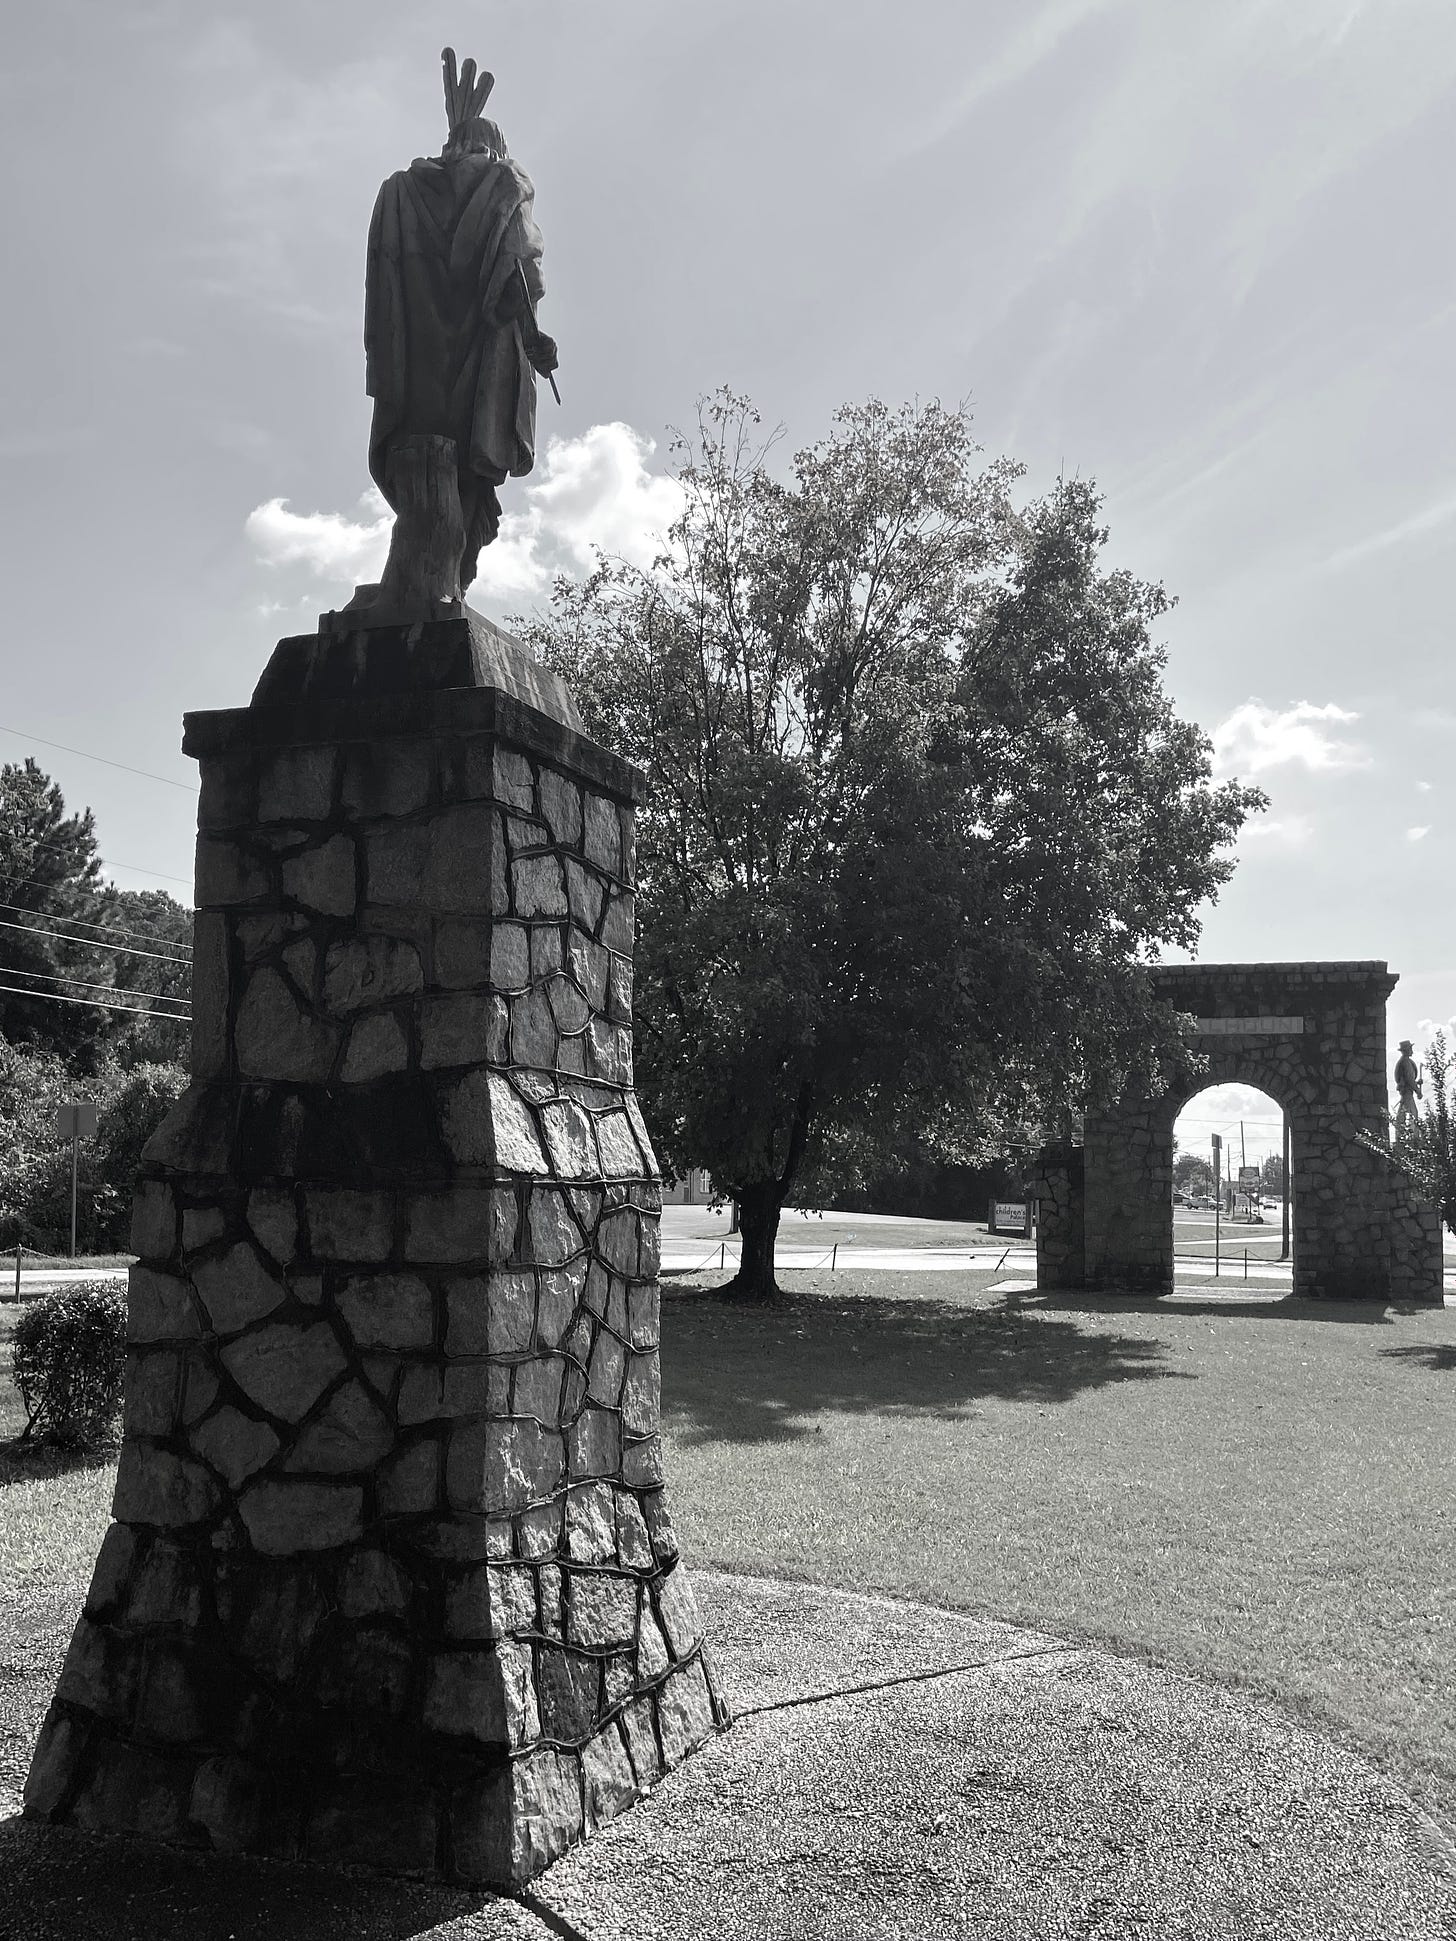 Statue of Sequoyah in foreground facing the Calhoun War Memorial, honoring local World War I and Confederate soldiers. Author Photograph October 9, 2021.